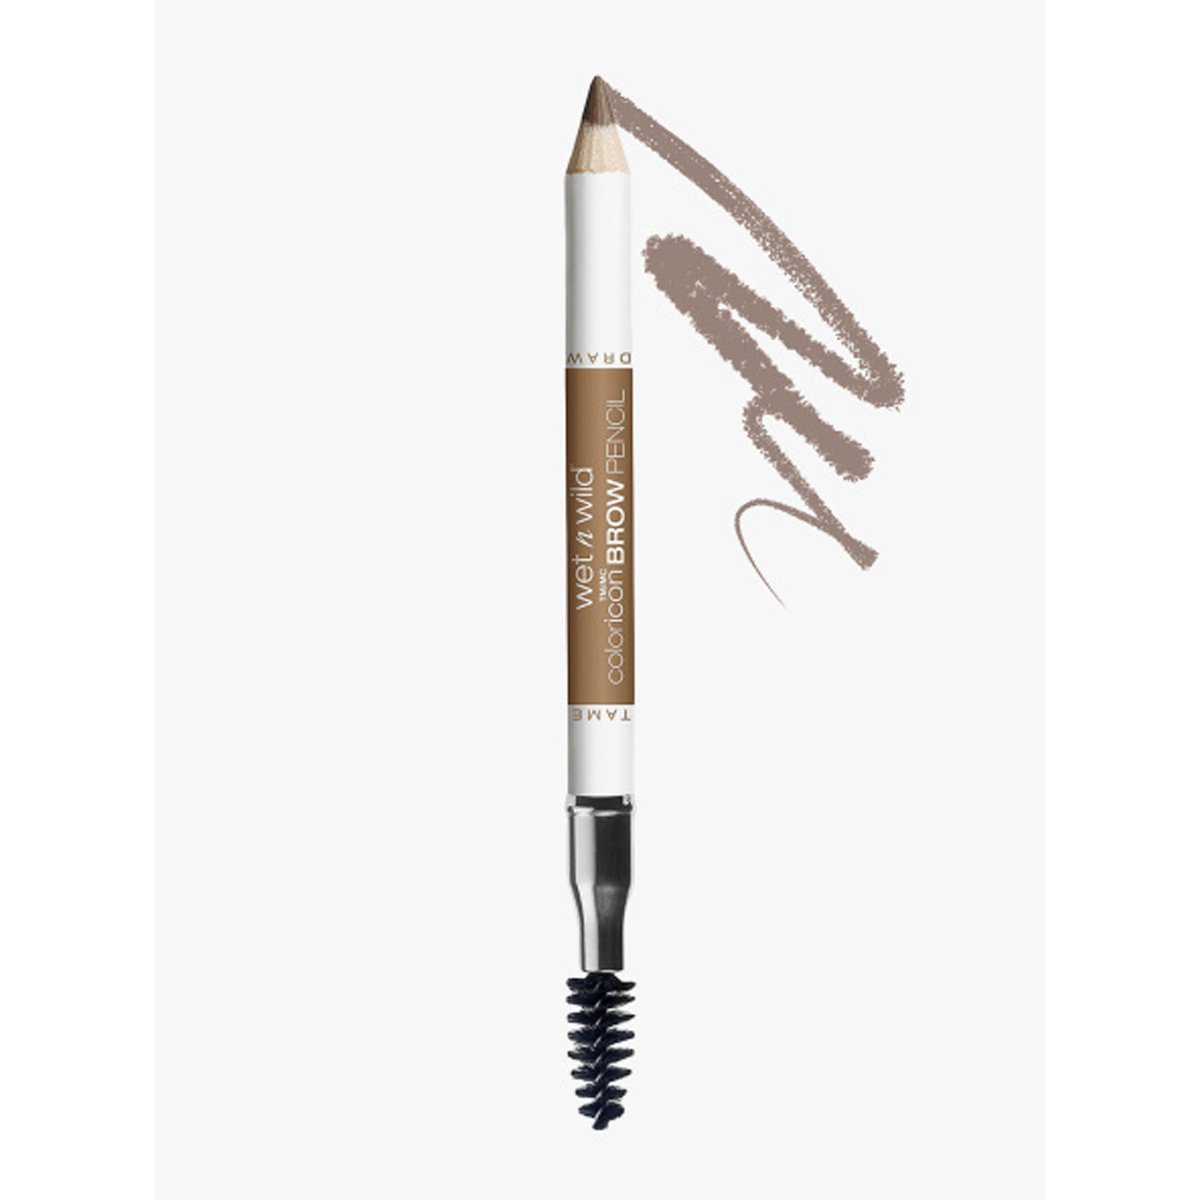 Wet And Wild Eyebrow Liner Blonde Moments WnW00E6211 1pc